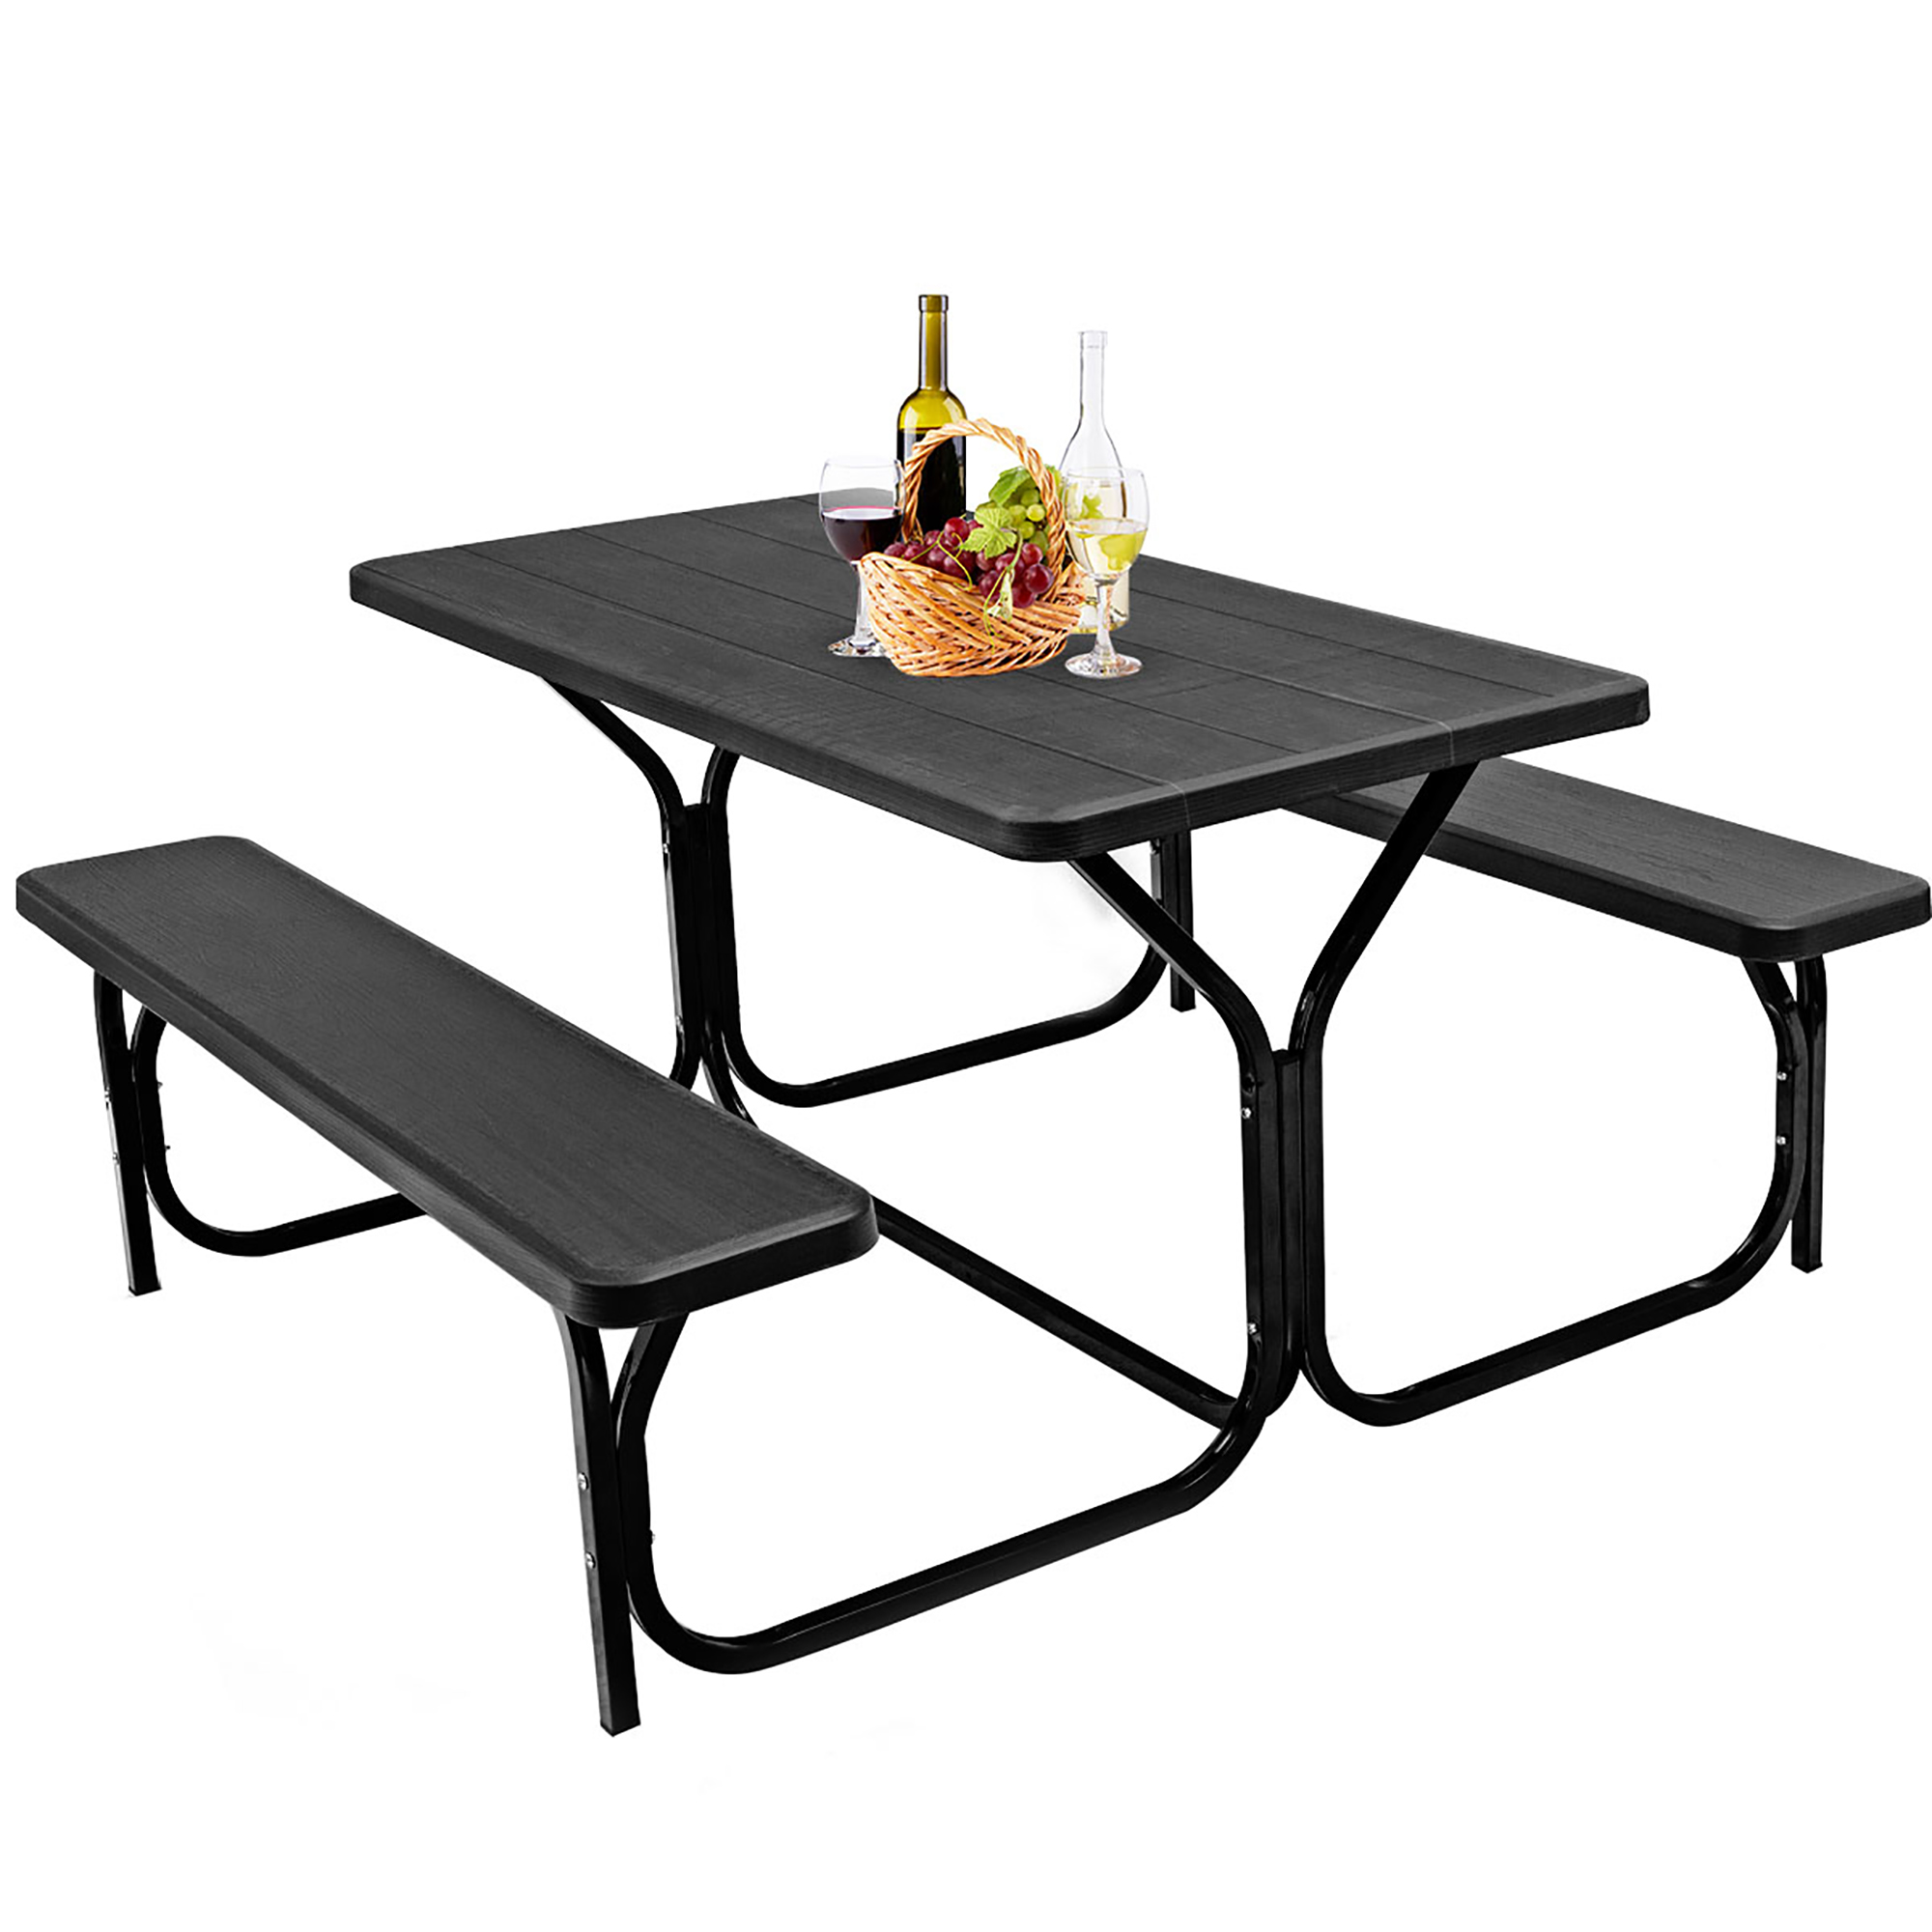 Costway Picnic Table Bench Set Outdoor Backyard Iron Patio Garden Party Dining All Weather Black - image 2 of 8